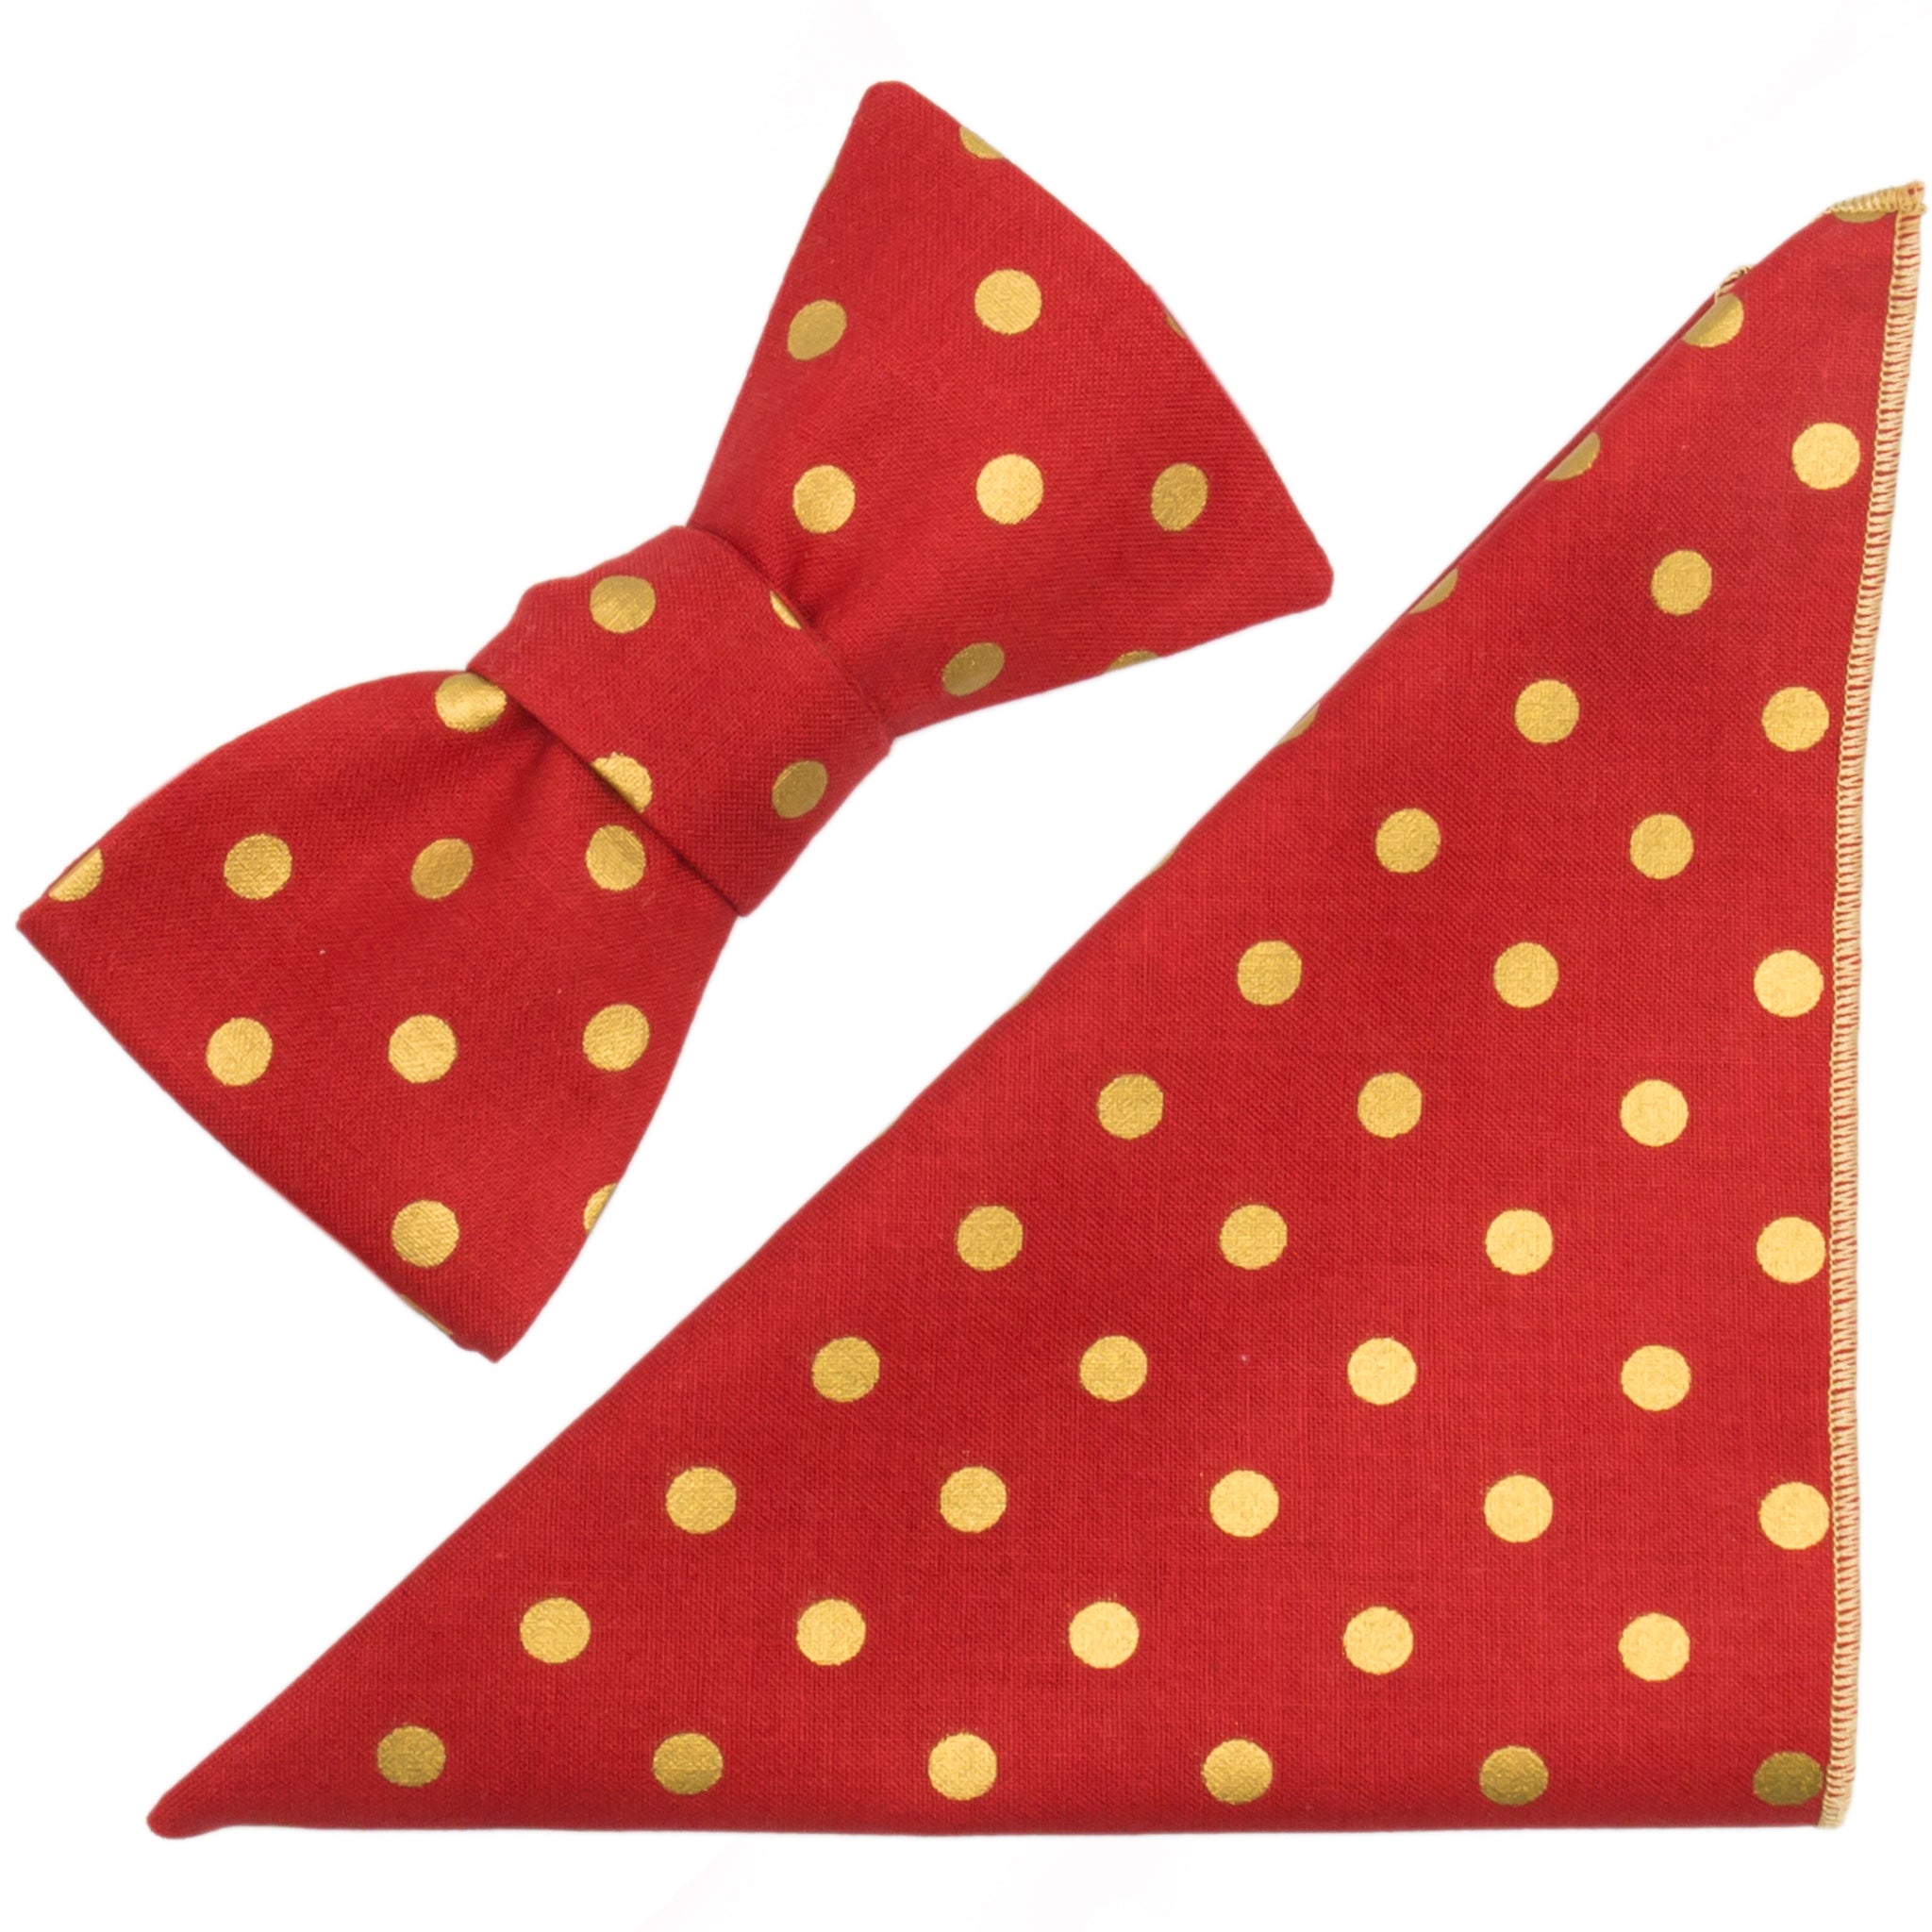 Red & Metallic Gold Polka Dot Cotton Bow Tie and Pocket Square Made in Canada